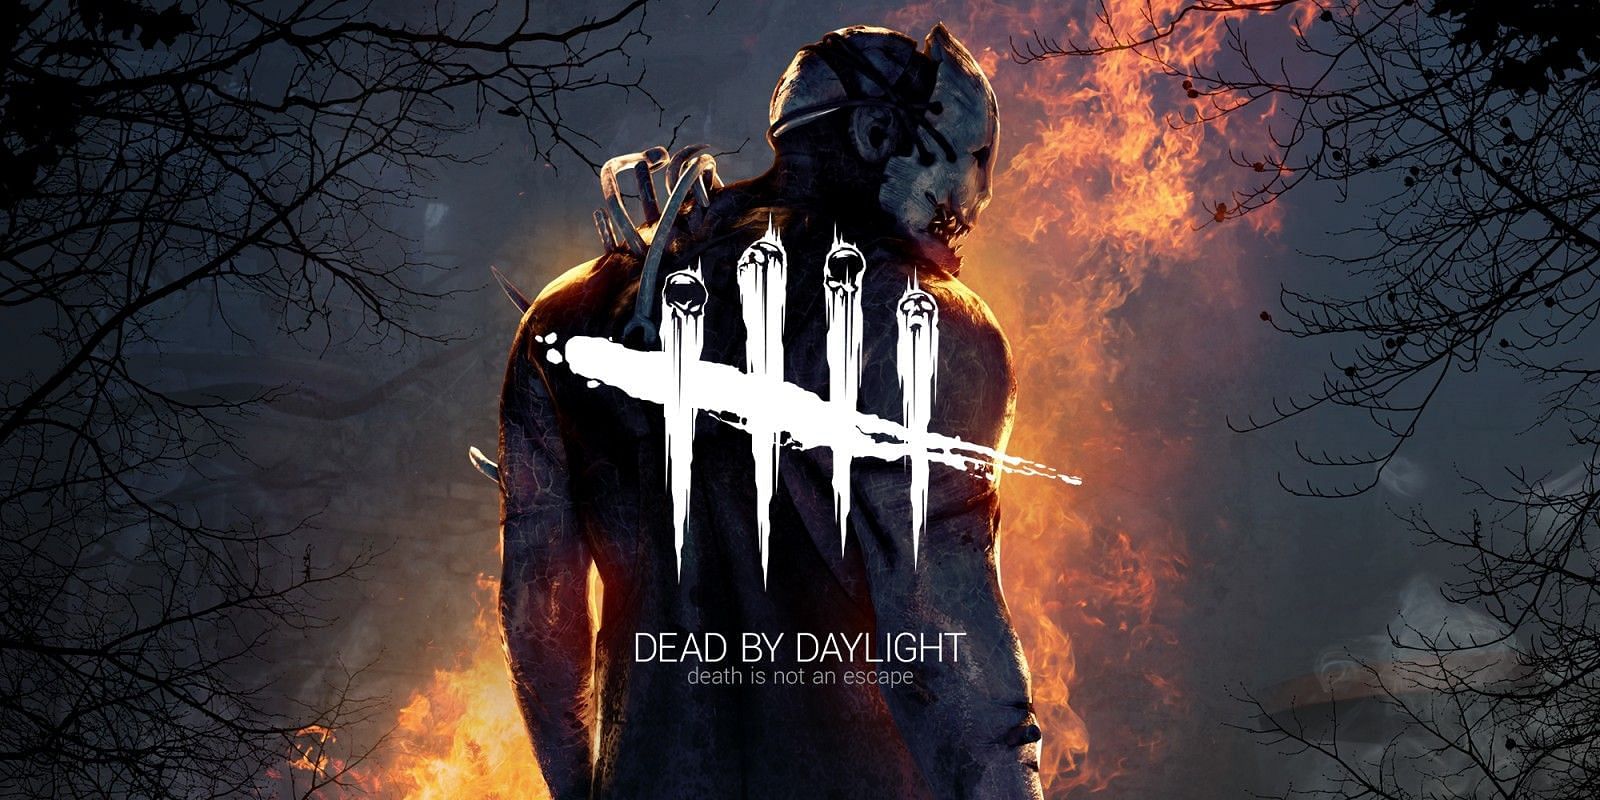 The Dredge is the rumored new Killer coming to Dead by Daylight (Image via Koch Media)